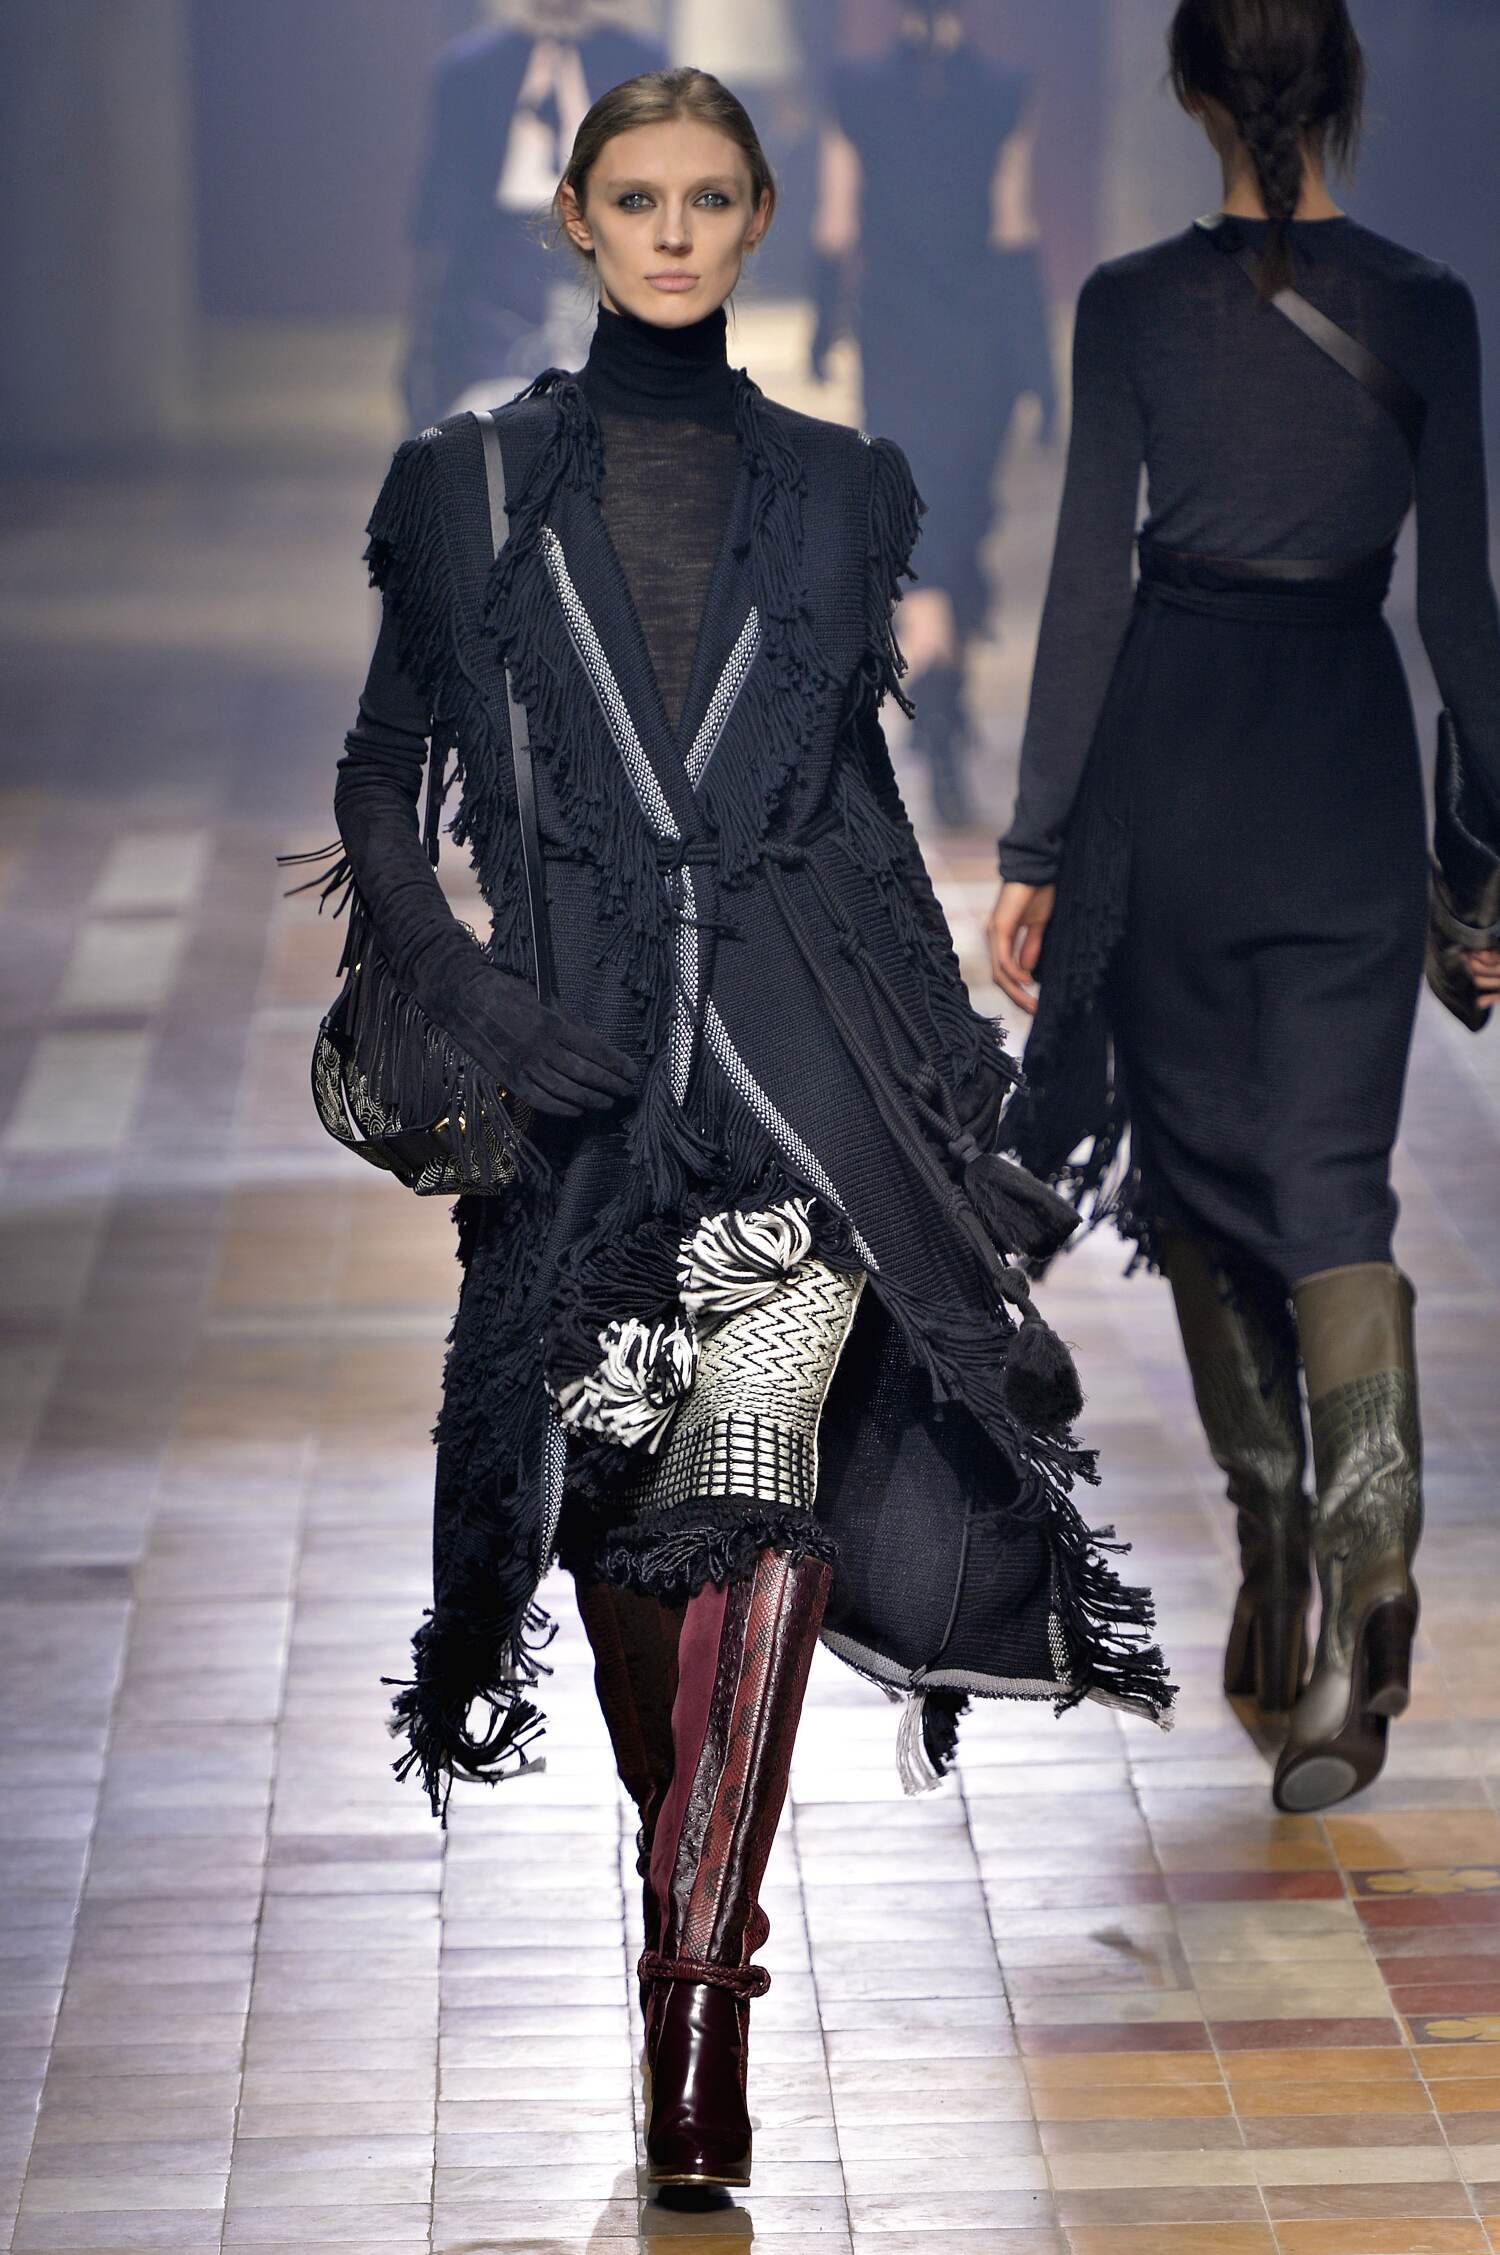 LANVIN FALL WINTER 2015-16 WOMEN’S COLLECTION | The Skinny Beep